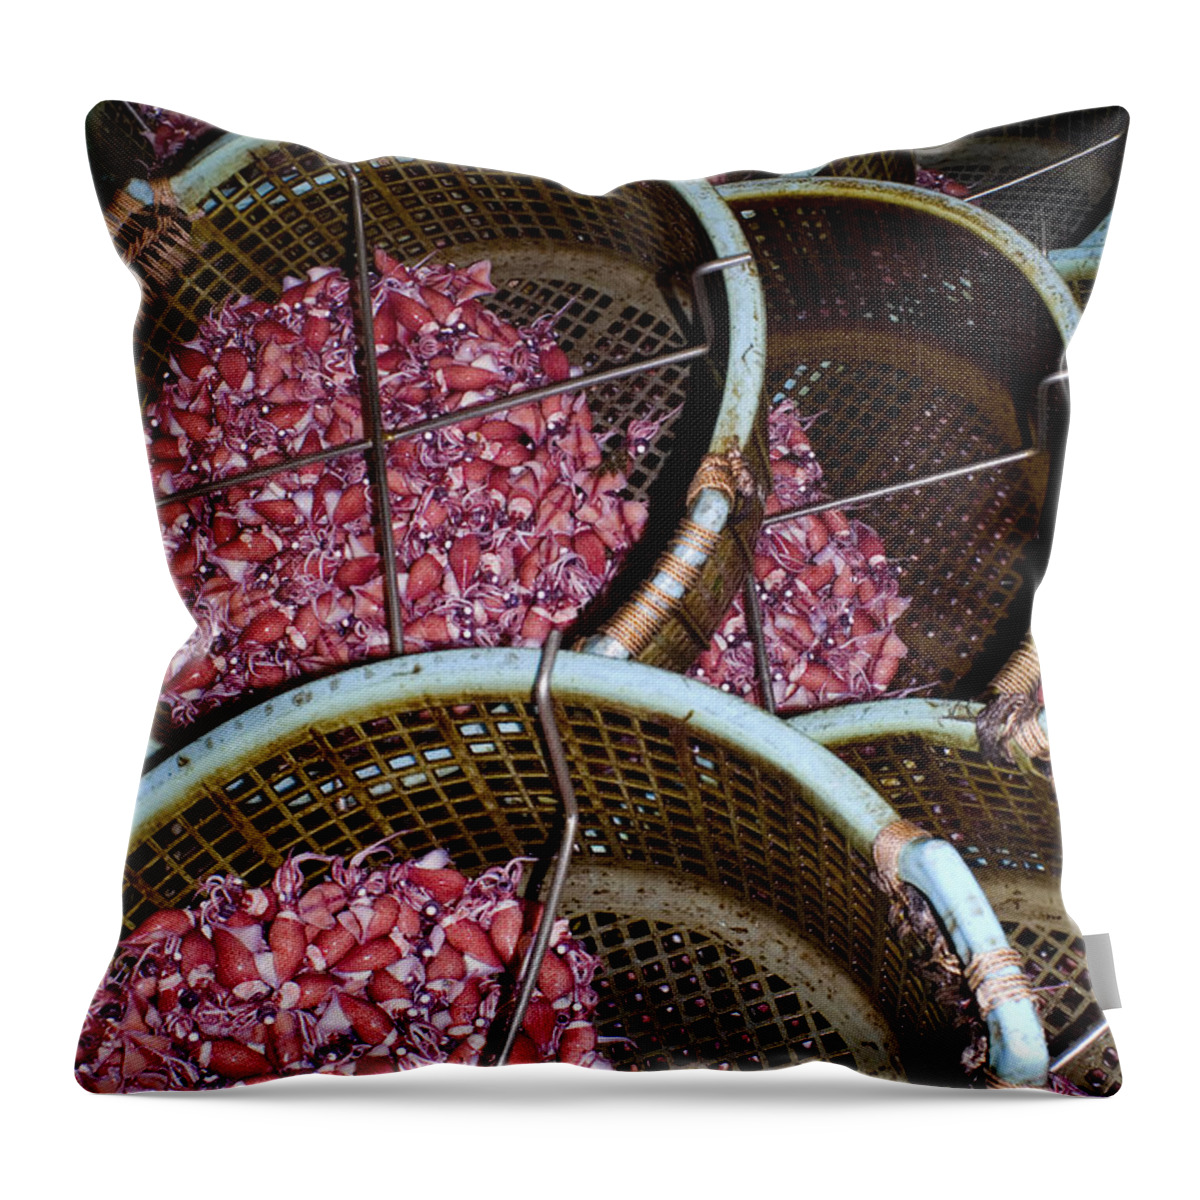 Japan Fishery Throw Pillow featuring the photograph Firefly Squid Catch by Dante Fenolio